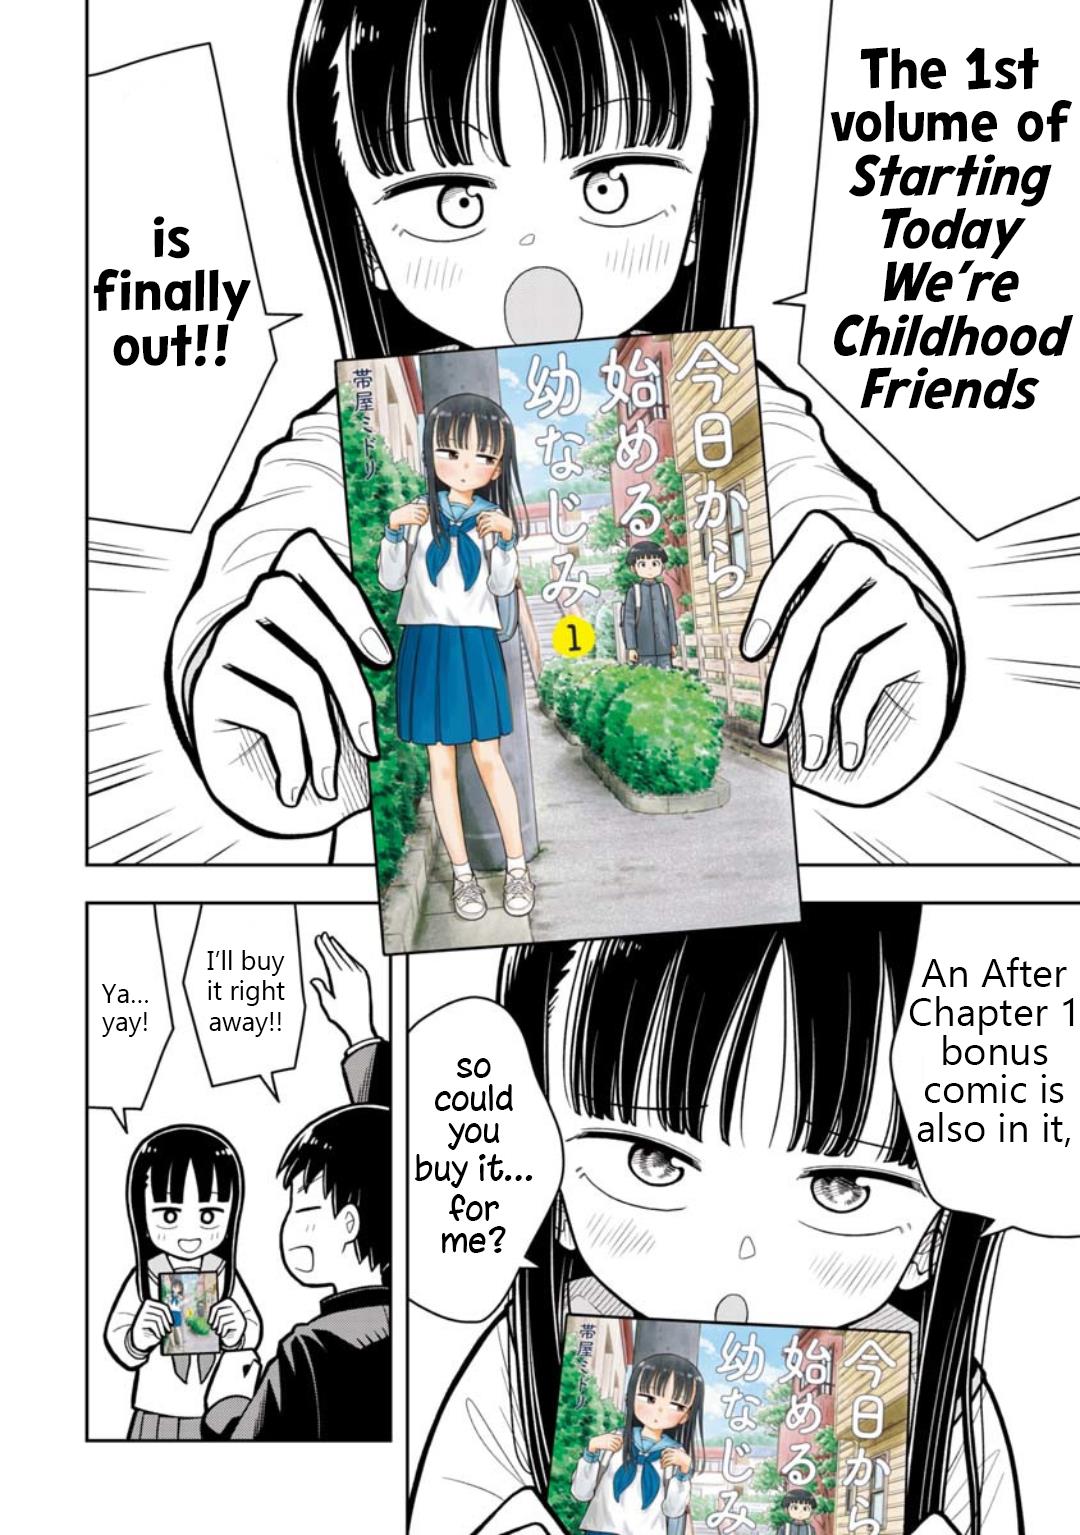 Starting Today She's My Childhood Friend Chapter 12.1: Volume 1 Pr Comic - Picture 2